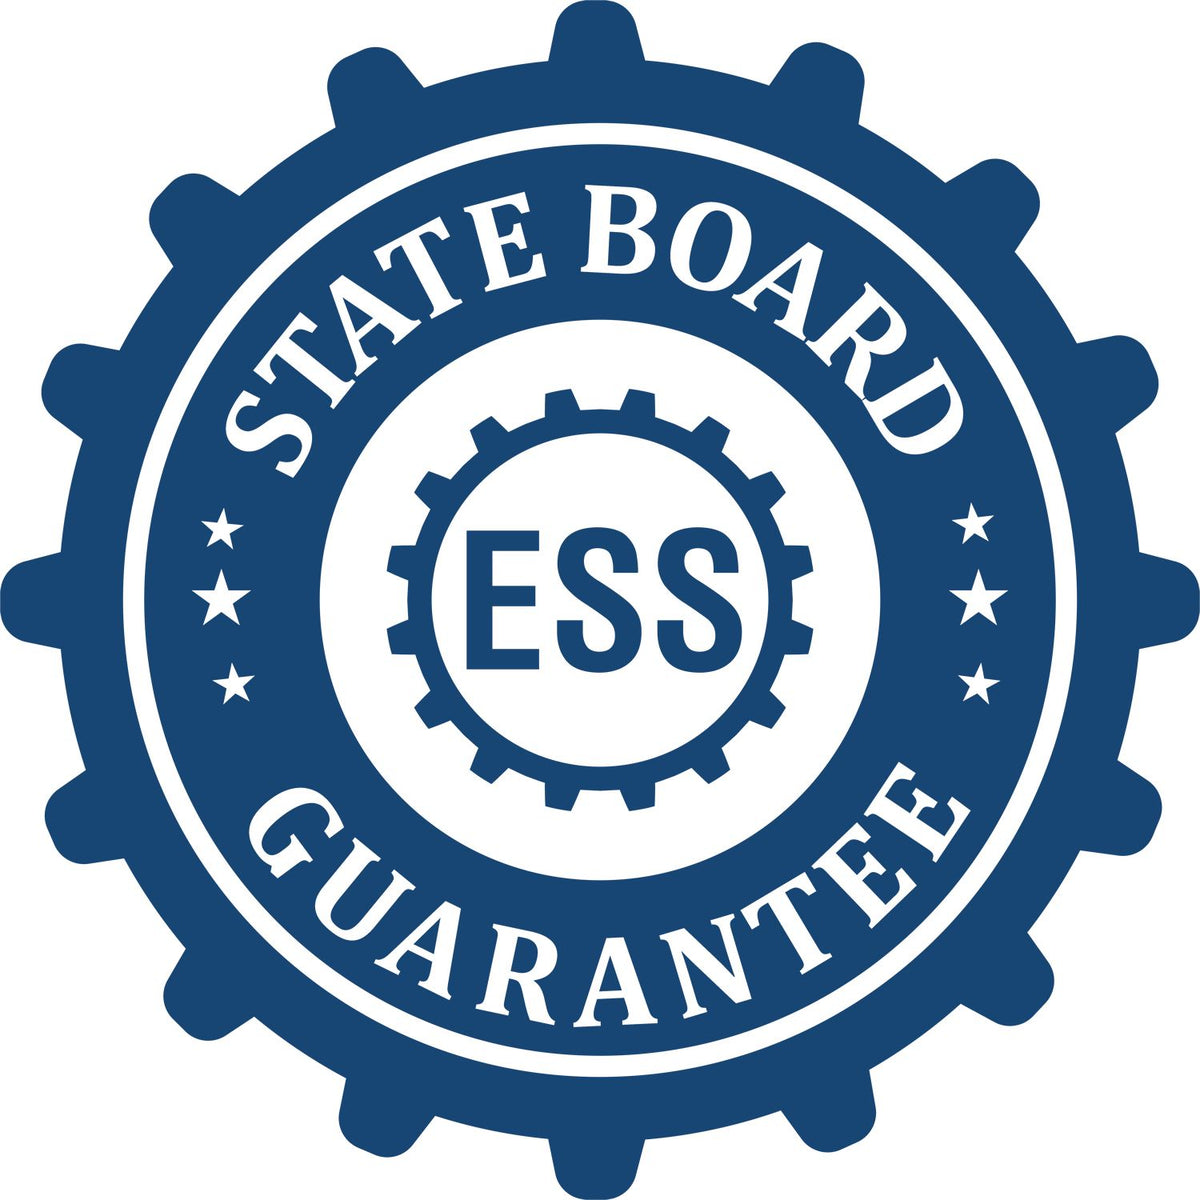 An emblem in a gear shape illustrating a state board guarantee for the Hybrid Arizona Landscape Architect Seal